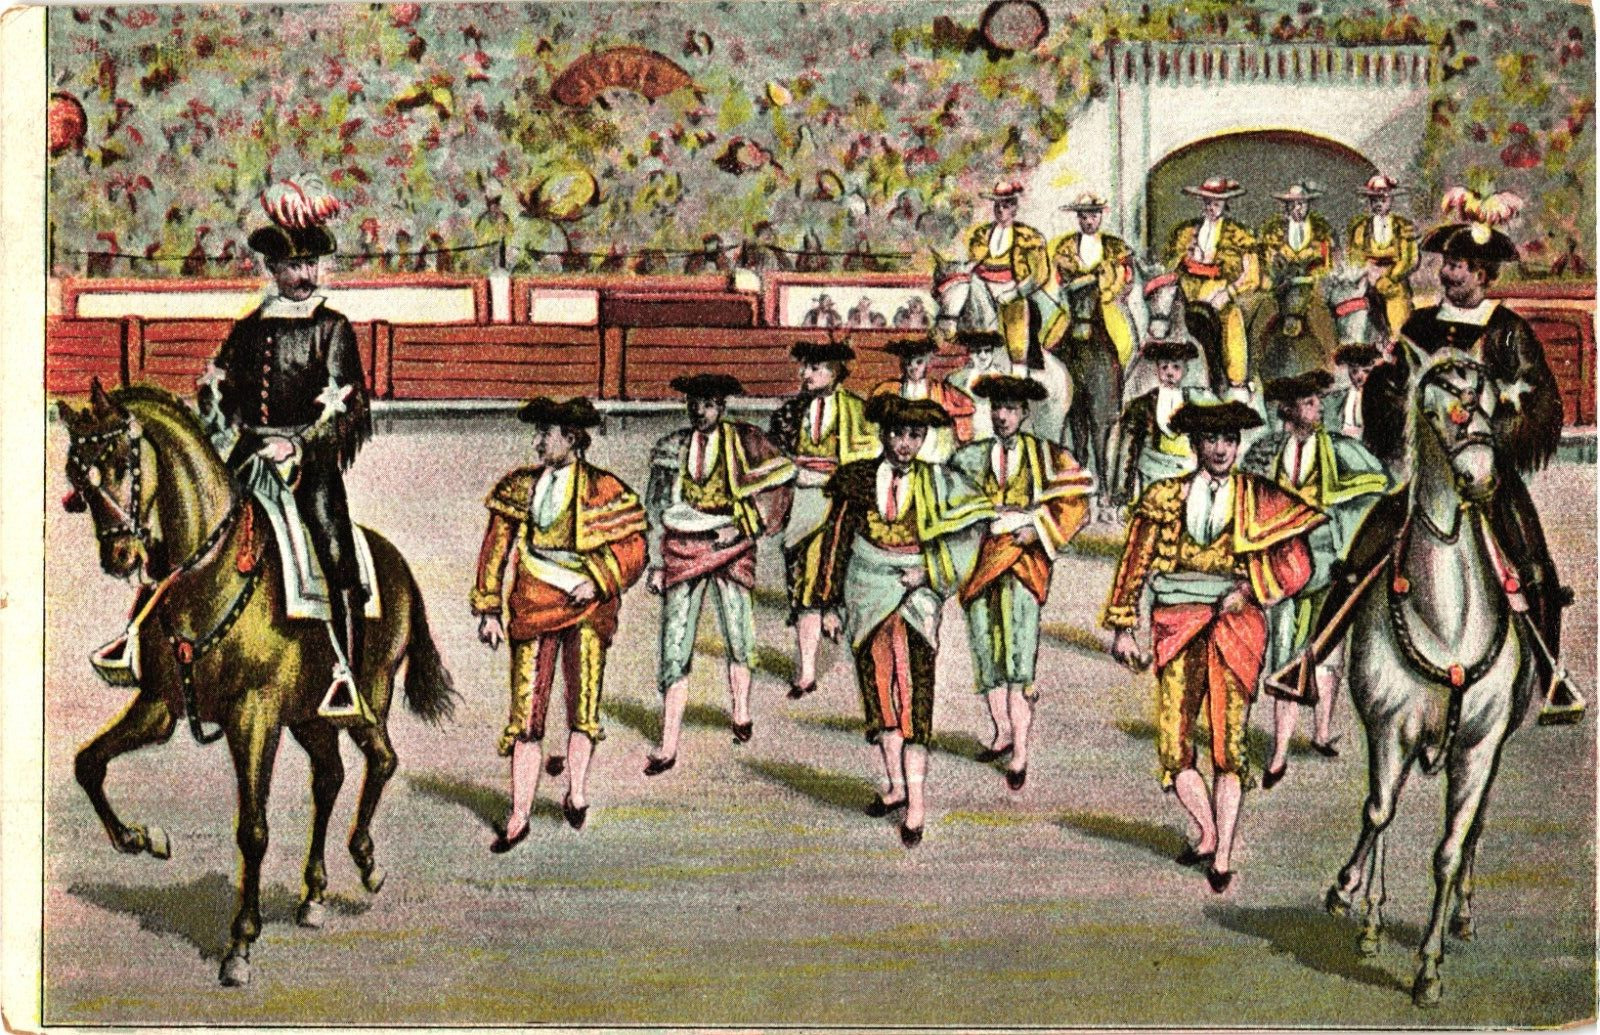 Parade of Bullfighters Bull Ring Mexico Undivided Unposted Postcard c1905